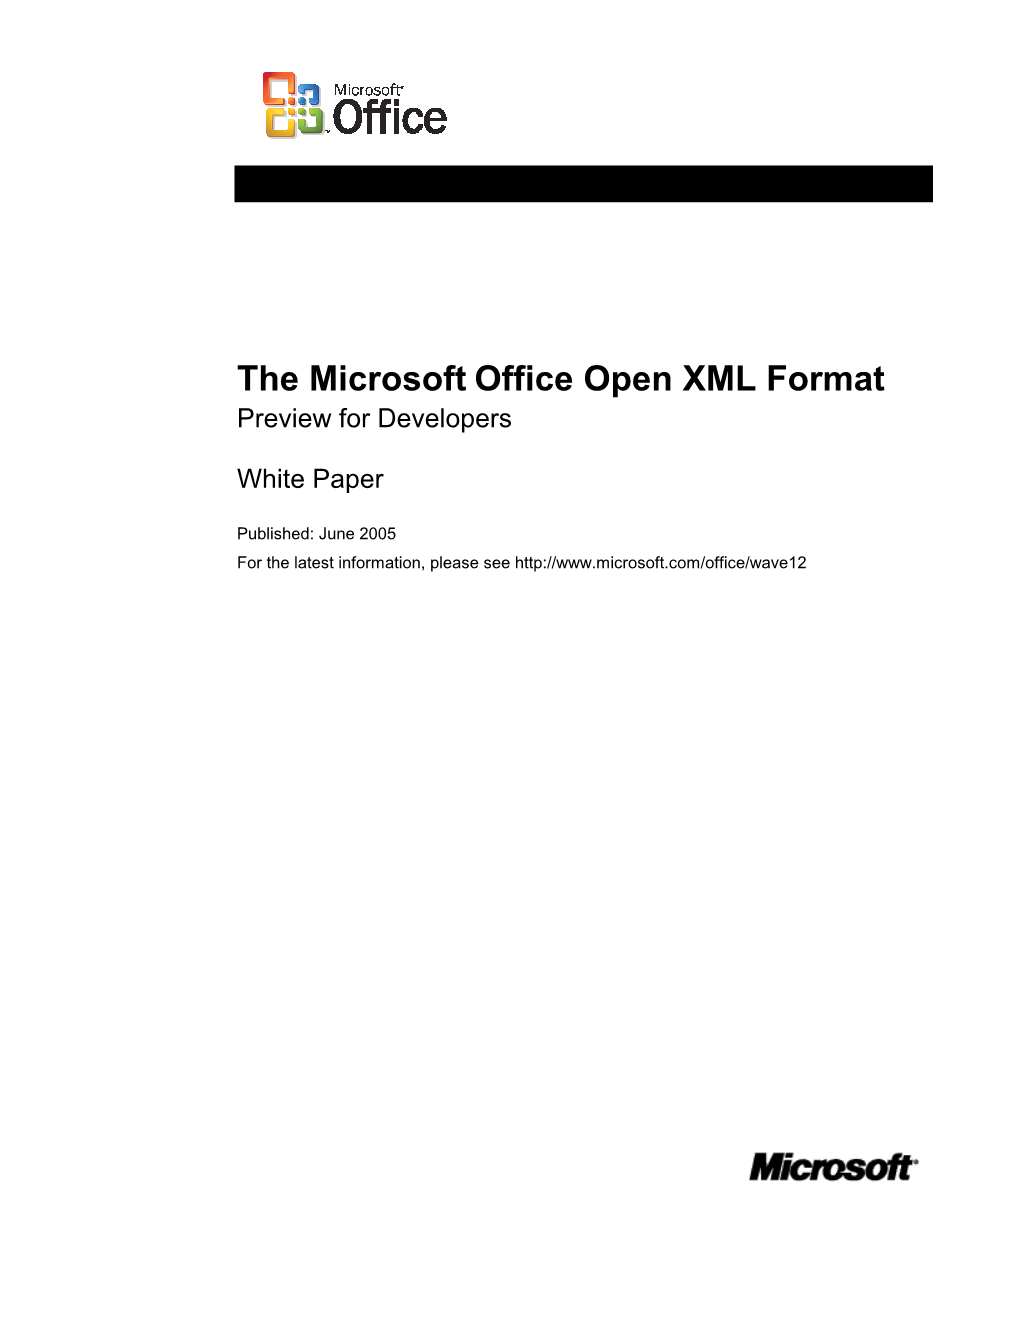 The Microsoft Office Open XML Format Preview for Developers White Paper